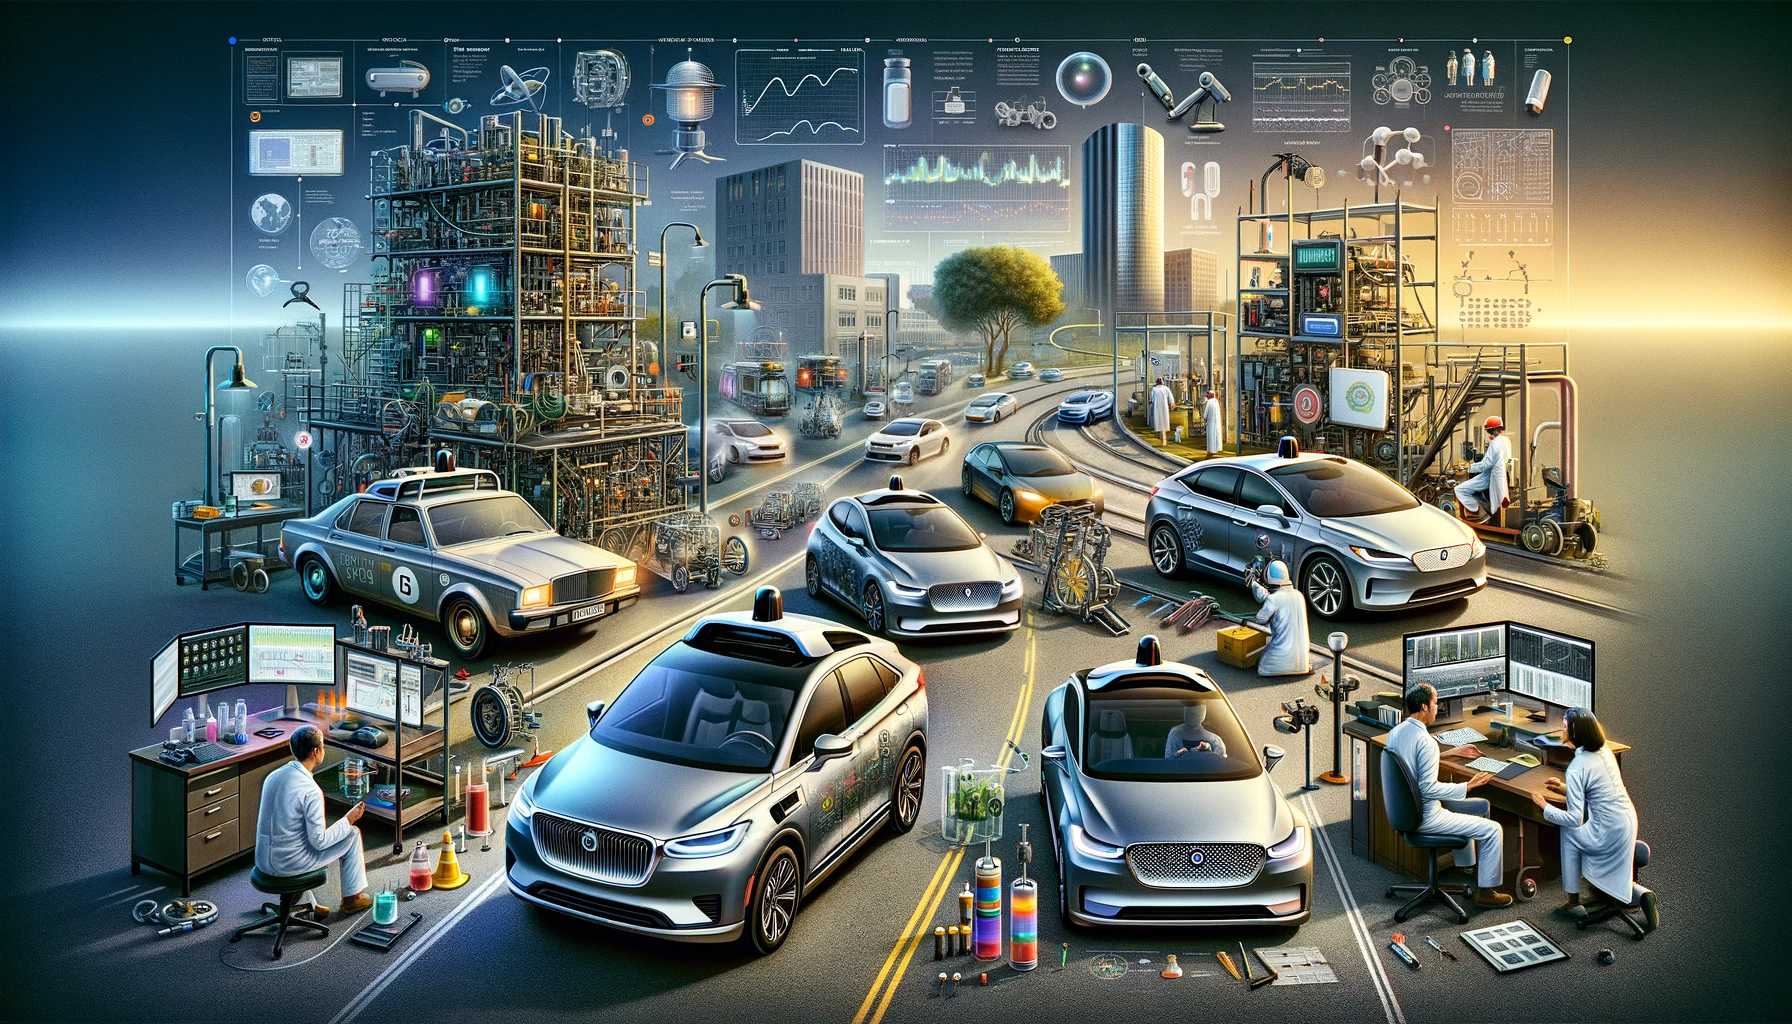 The Development of Self-Driving cars